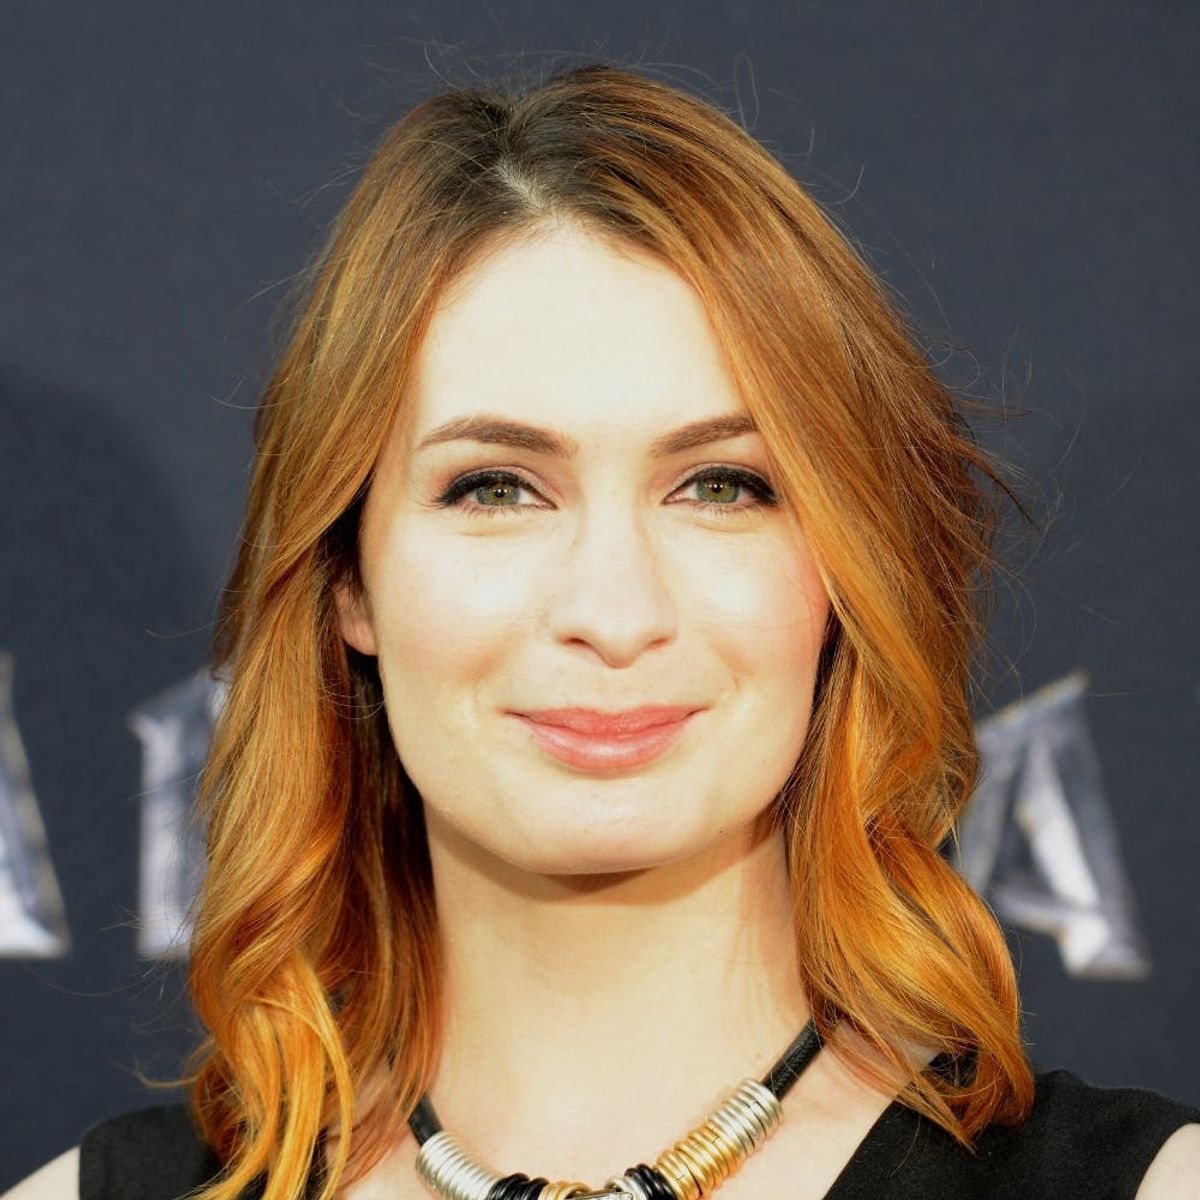 Whoa! Felicia Day Announced She’s Pregnant Just 3 Weeks Before the Due Date